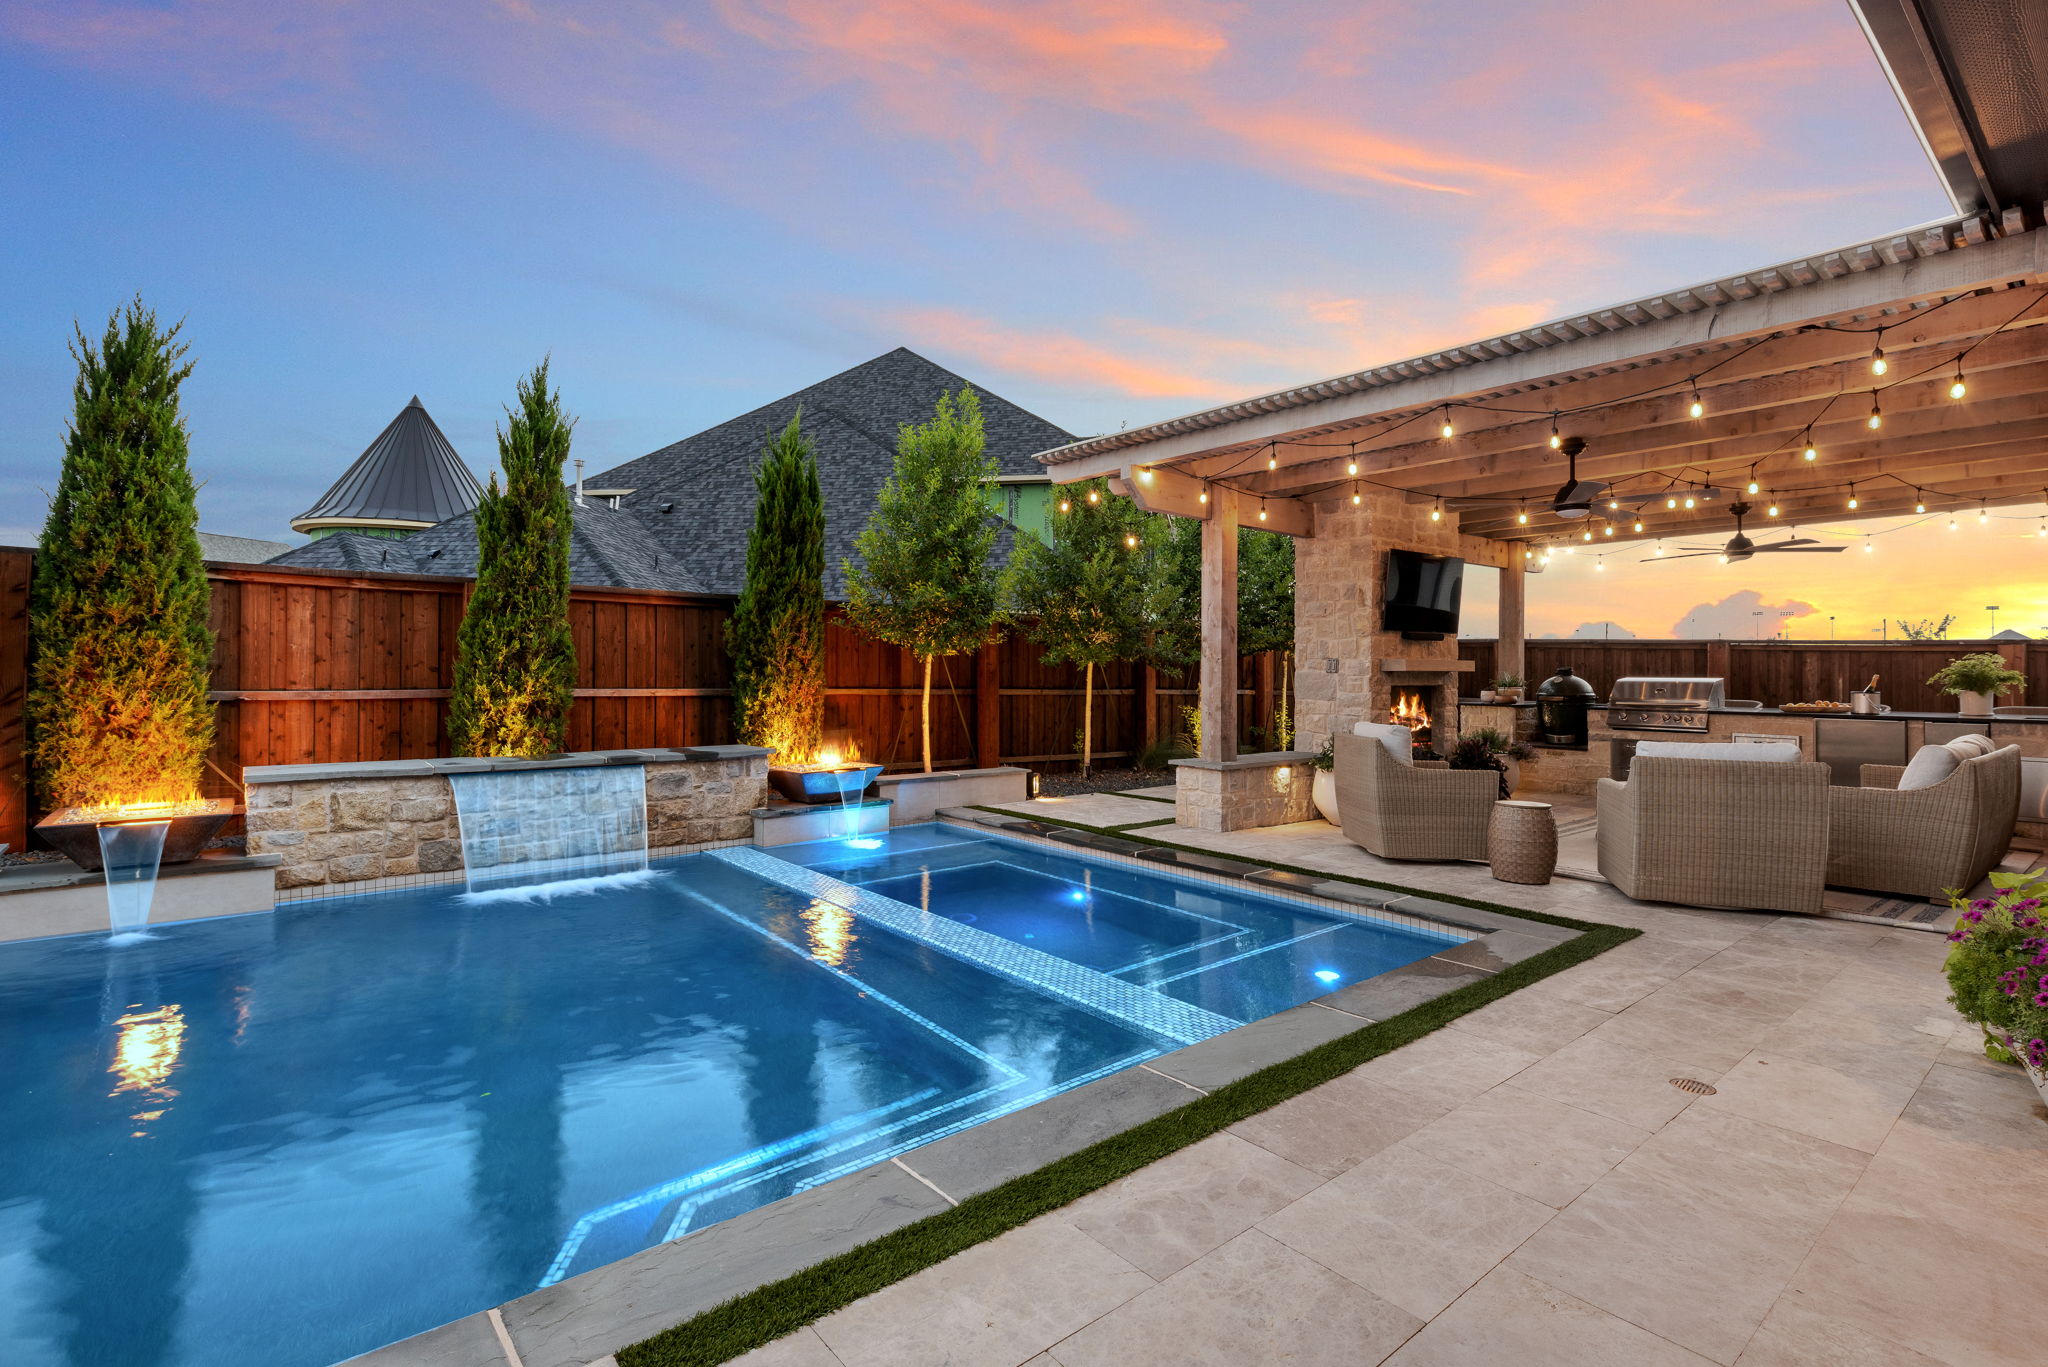 Swimming Pool and Outdoor Patio at Night